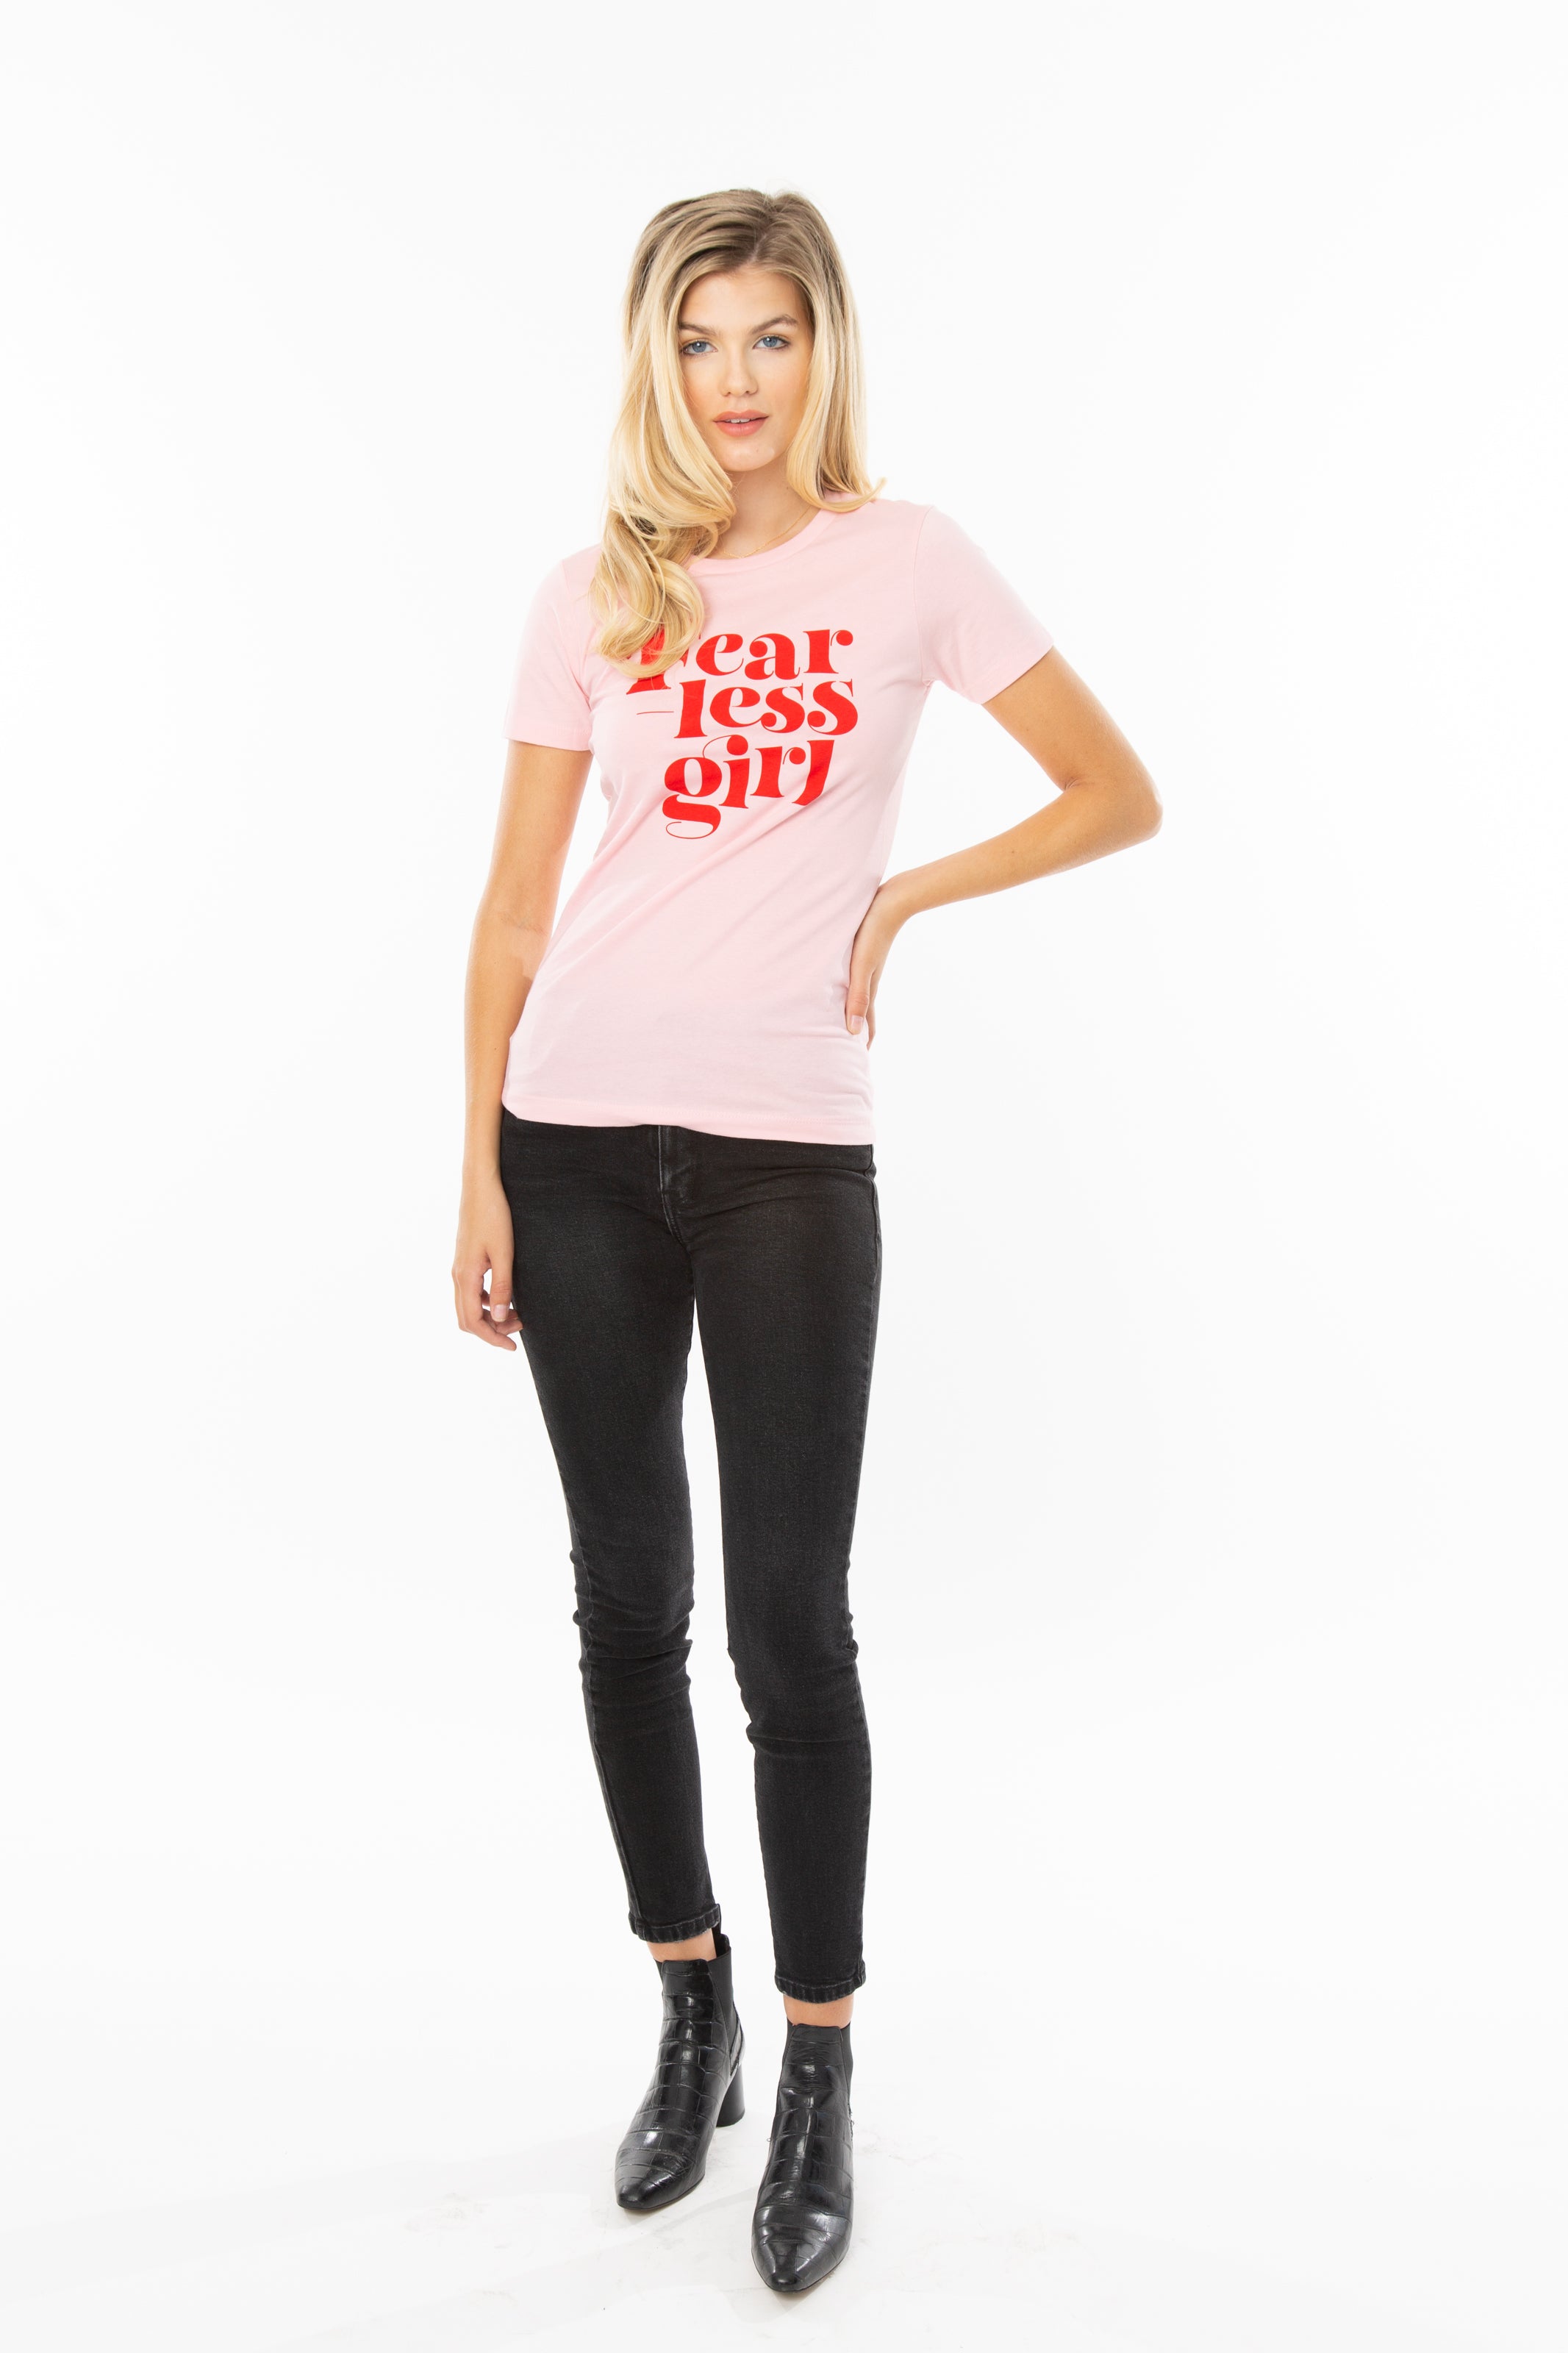 Fearless Girl Feminist Graphic Tee - Pink